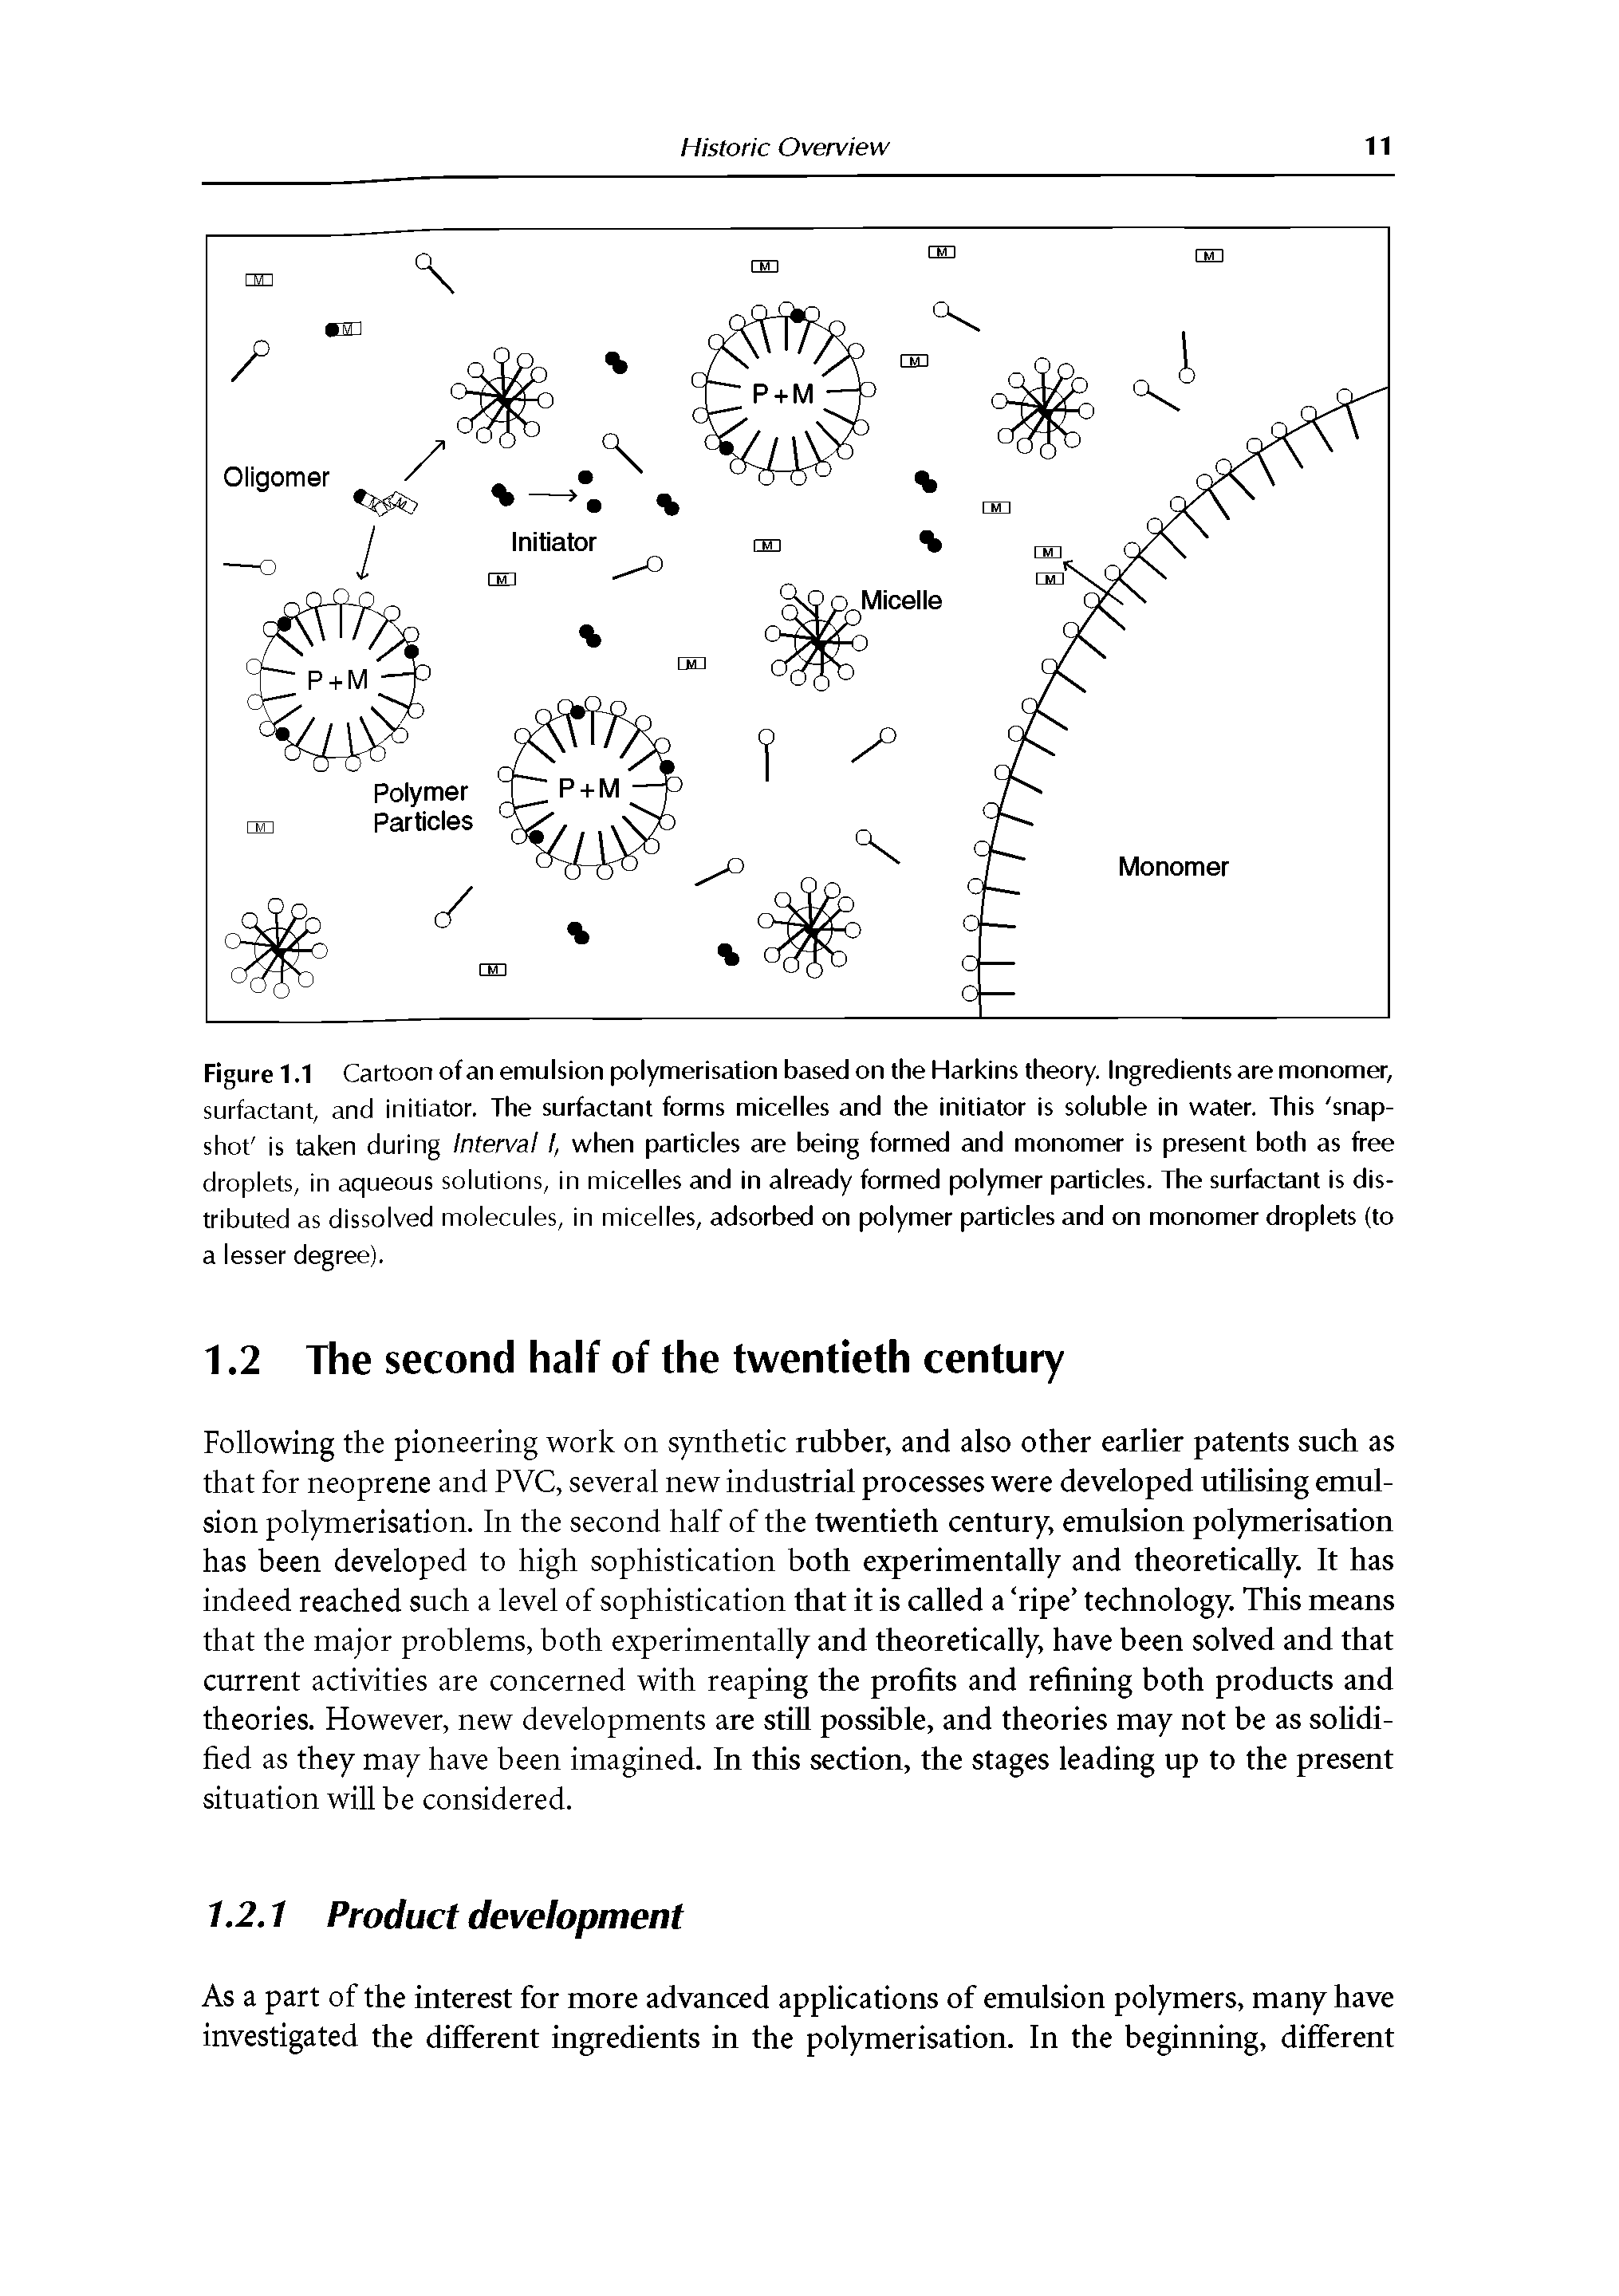 Figure 1.1 Cartoon of an emulsion polymerisation b lsed on the Harkins theory. Ingredients are monomer, surfactant, and initiator. The surfactant forms micelles and the initiator is soluble in water. This snapshot is taken during Interval I, when particles are being formed and monomer is present both as free droplets, in aqueous solutions, in micelles and in already formed polymer particles. The surfactant is distributed as dissolved molecules, in micelles, adsorbed on polymer particles and on monomer droplets (to a lesser degree).